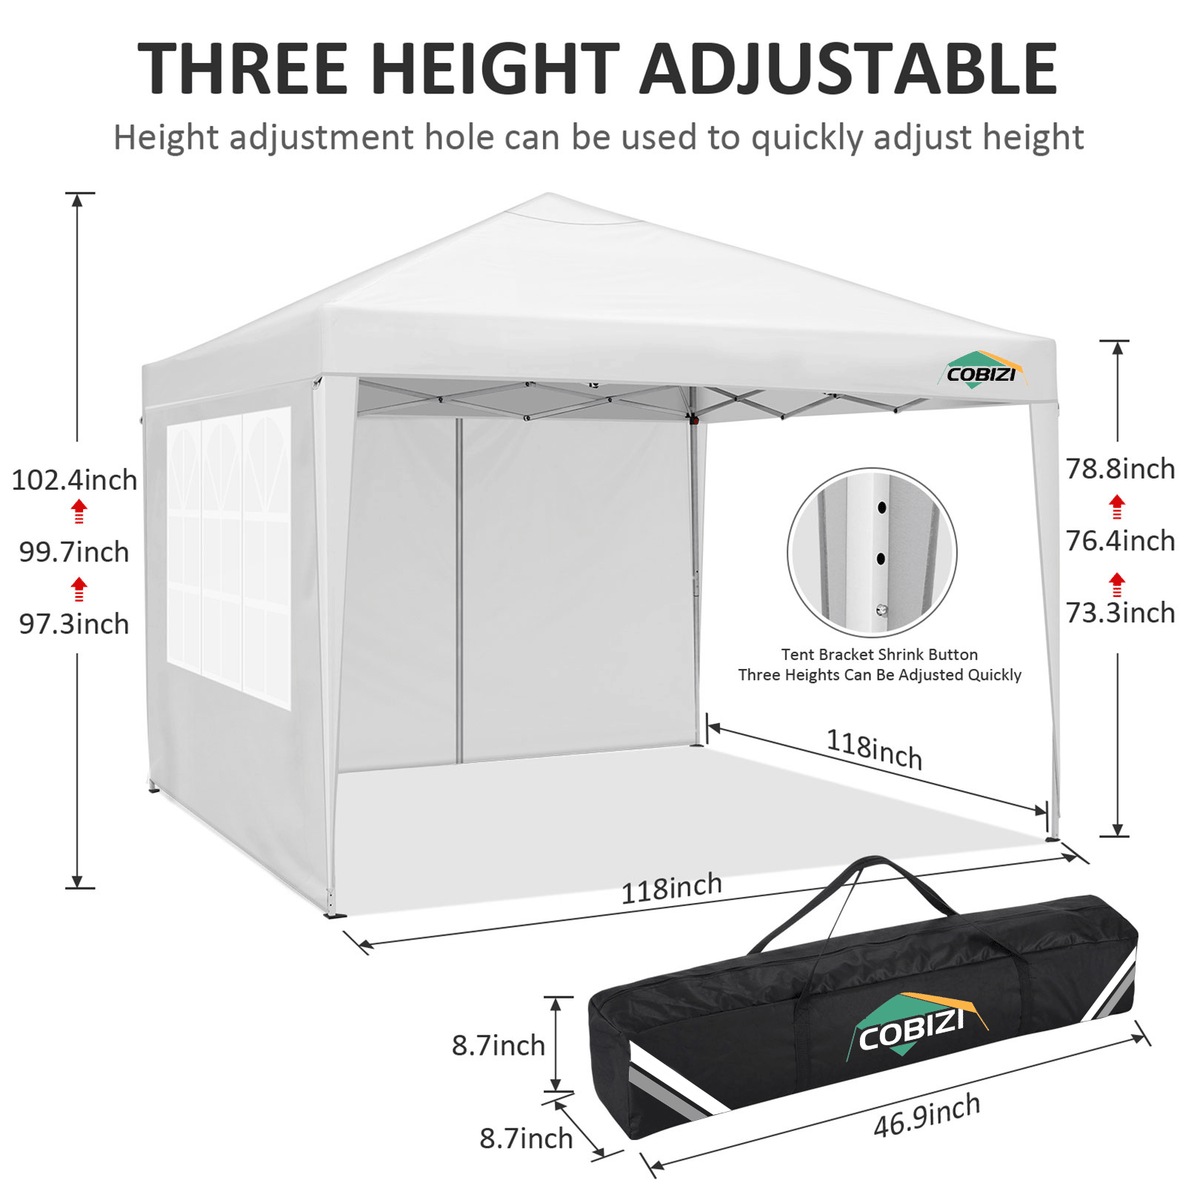 COBIZI 10x10ft Popup Canopy Waterproof Canopy with 4 Sidewalls Outdoor Commercial Instant Shelter Beach Camping Canopy Tent for Party